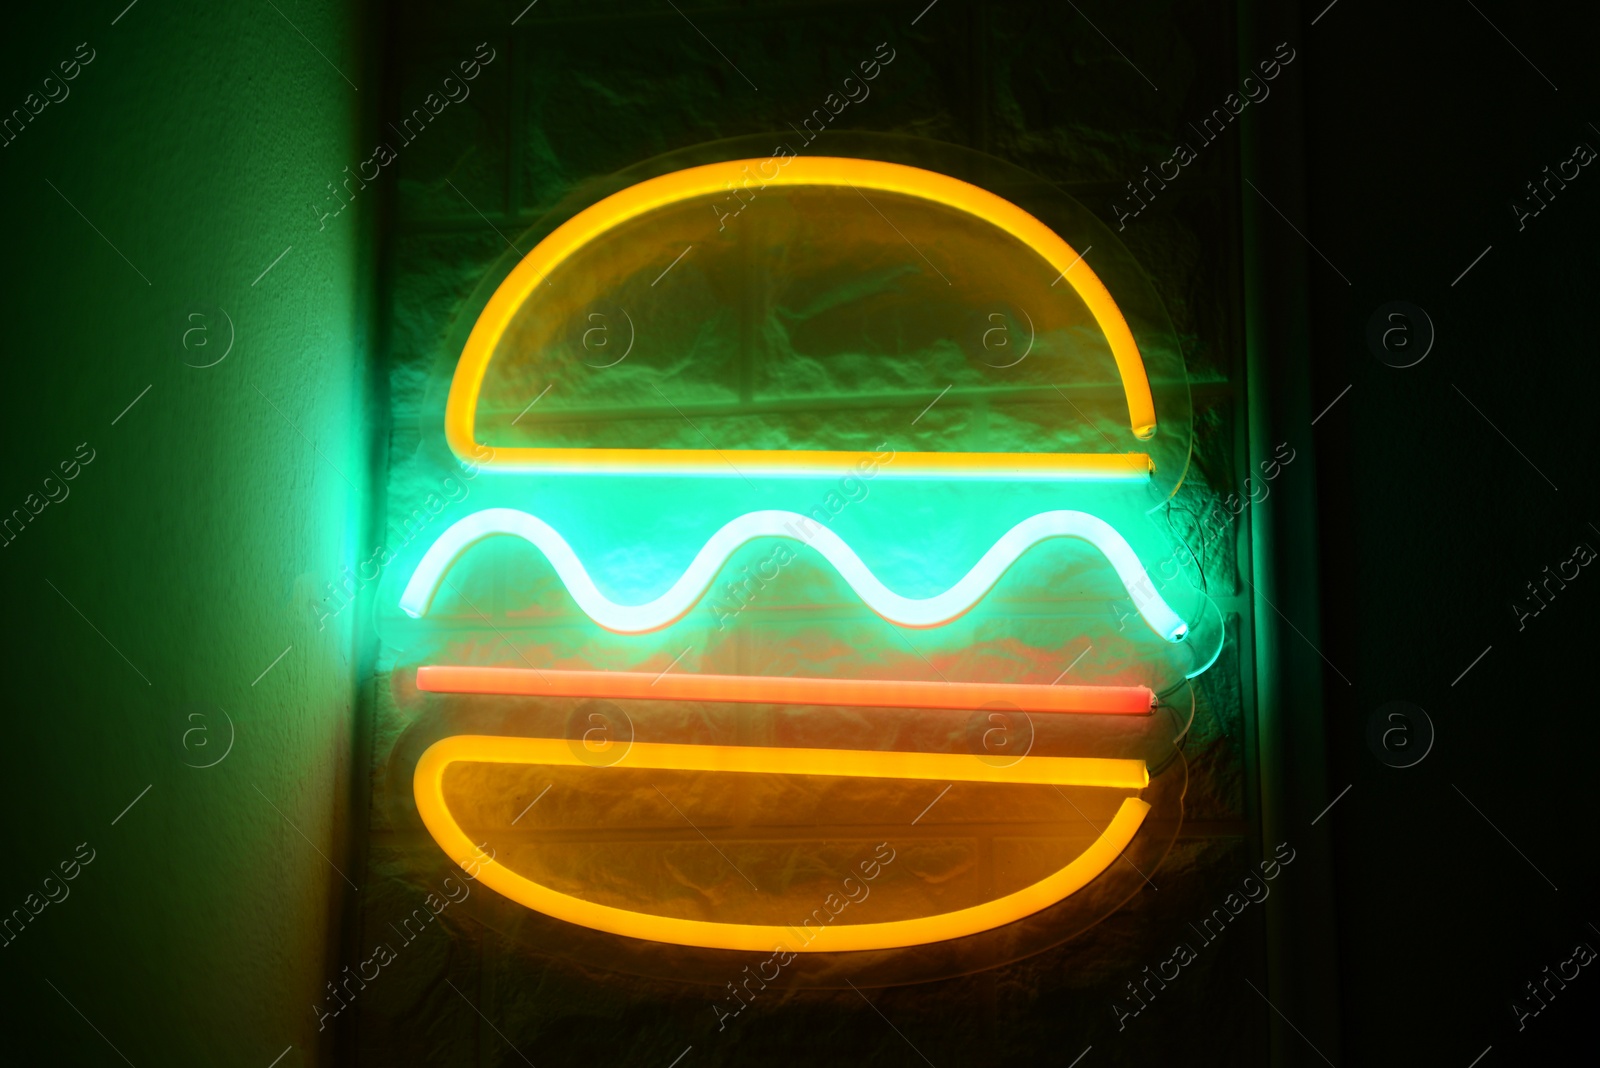 Photo of Burger shape neon sign on wall indoors